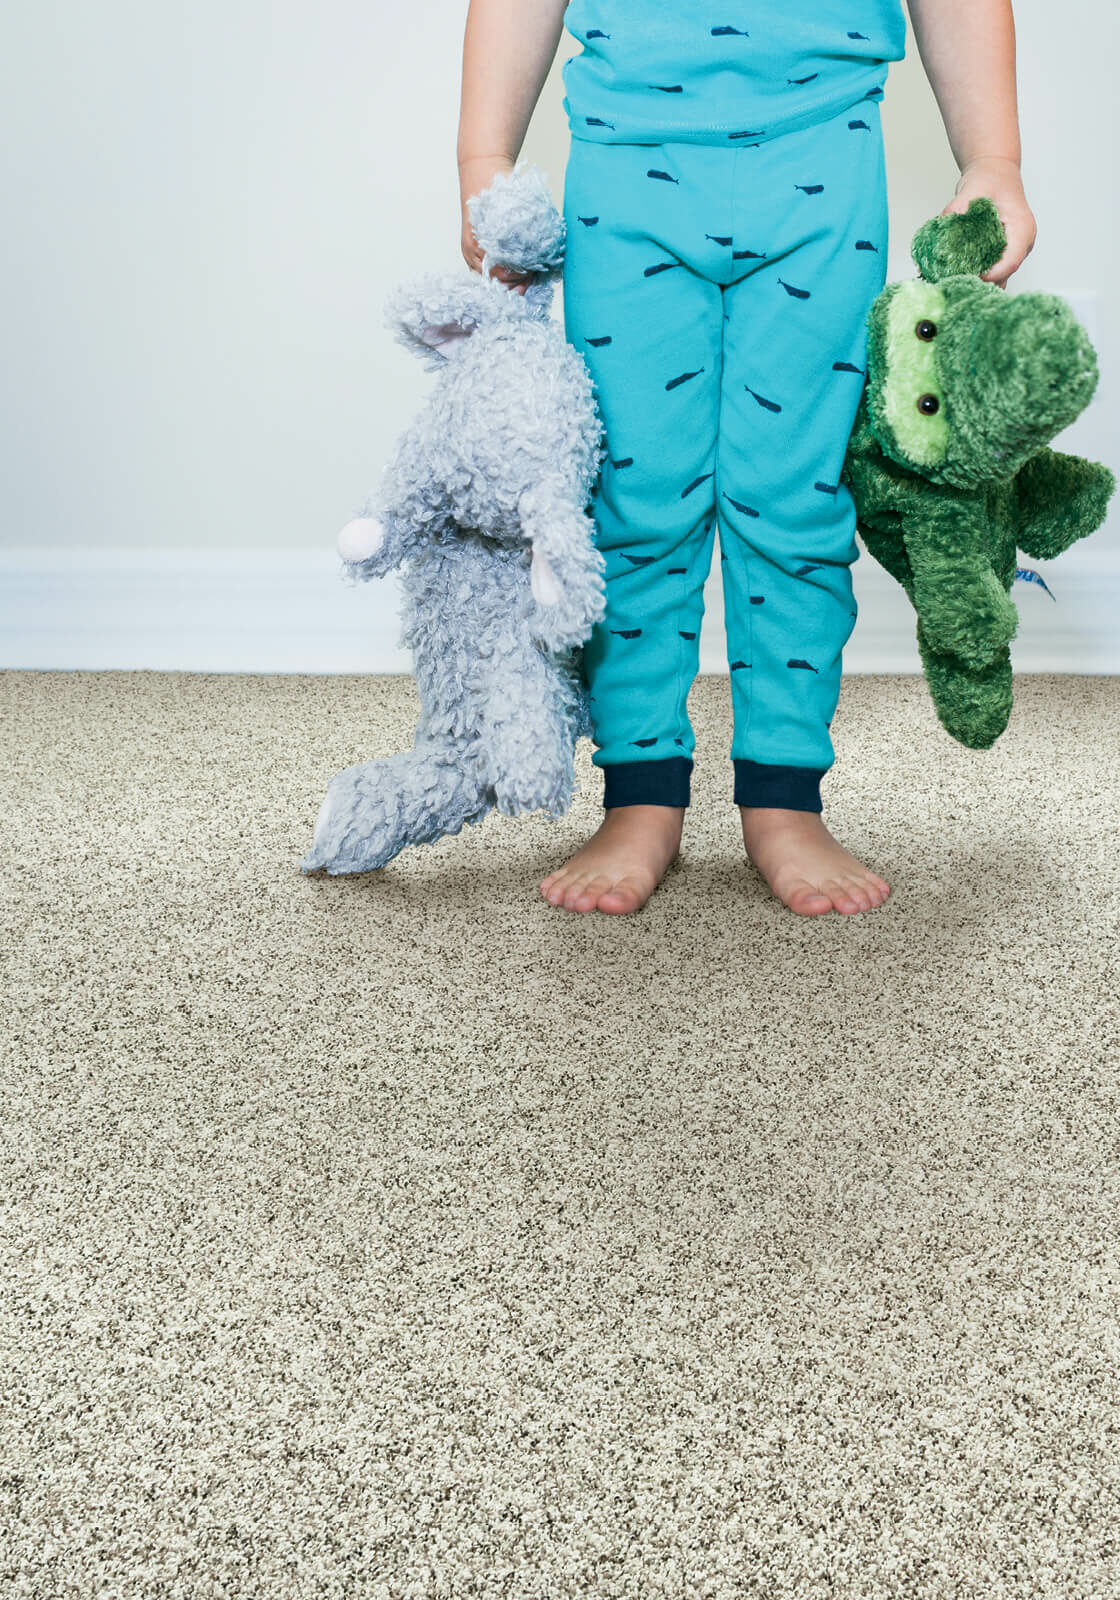 Kid with toys standing on soft carpet